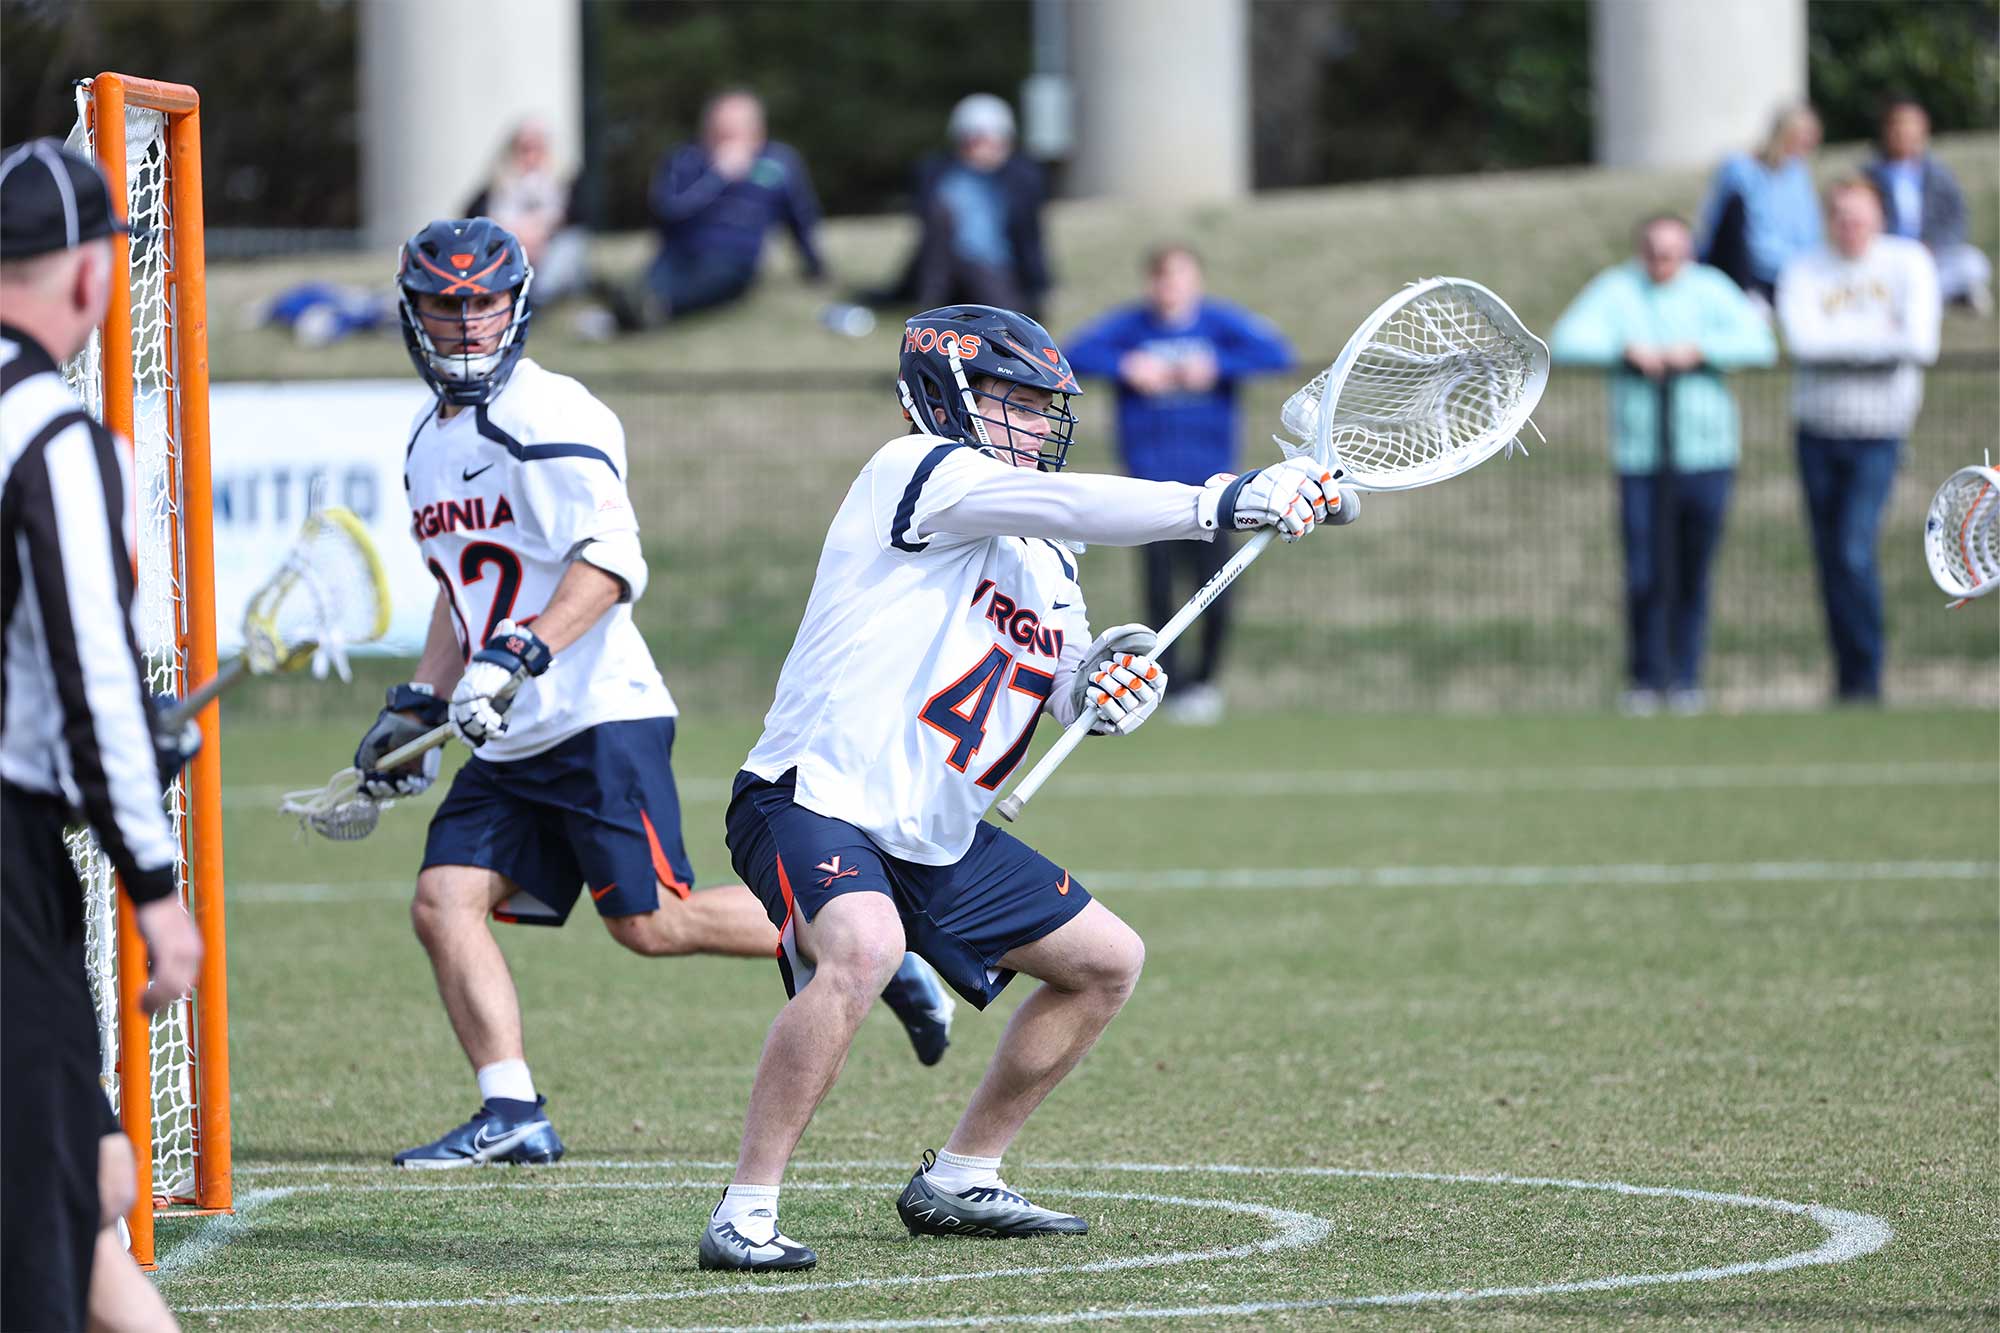 David Roselle playing goalie in a lacrosse game